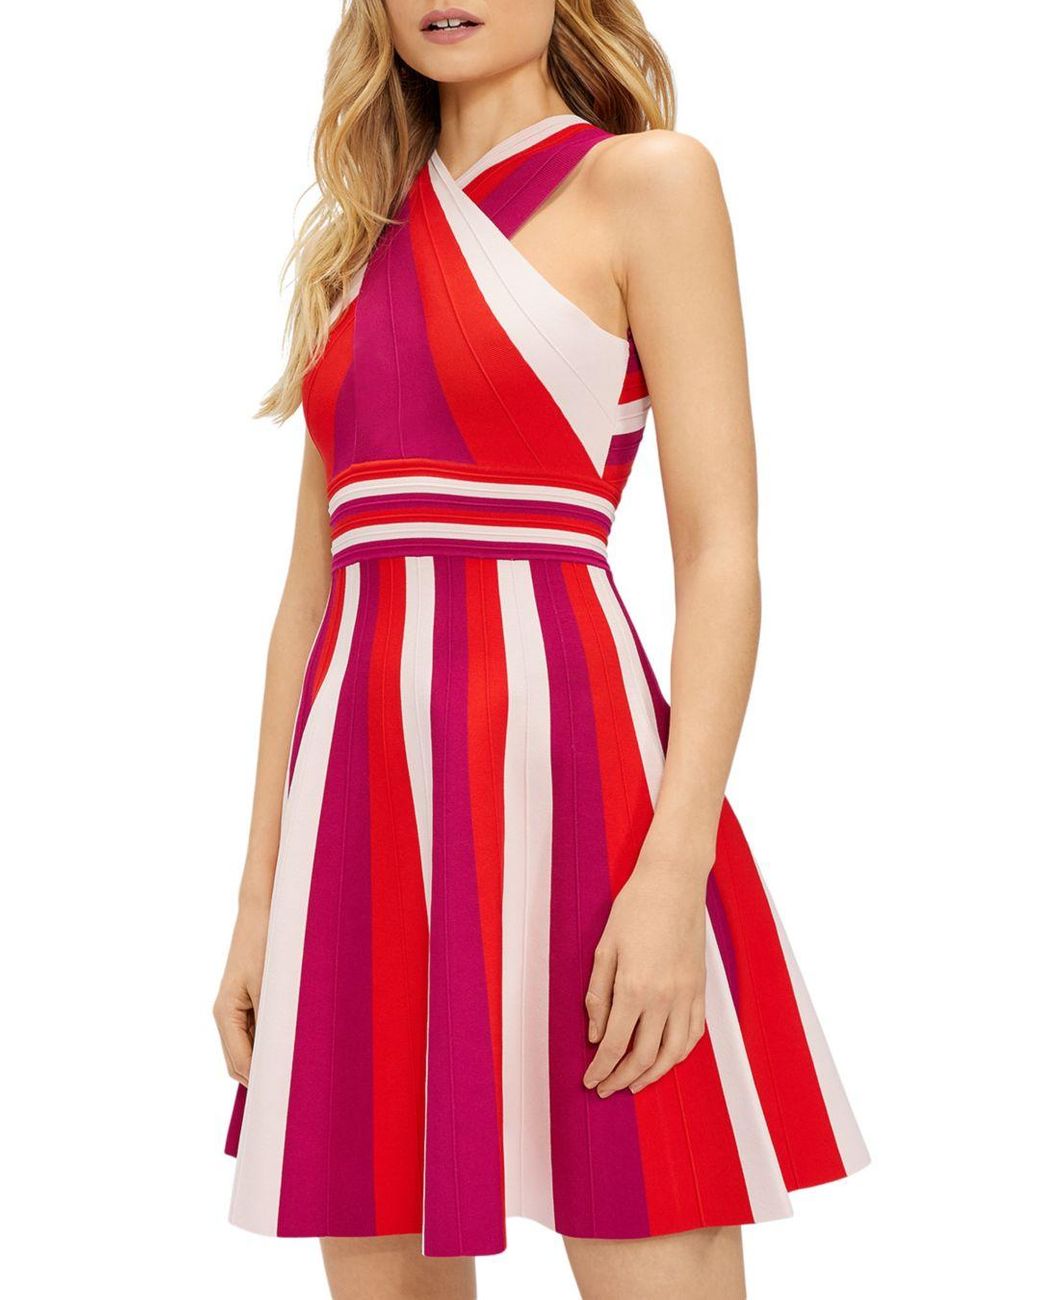 Ted Baker Synthetic Metropolis Stripe Knit Skater Dress in Bright Pink